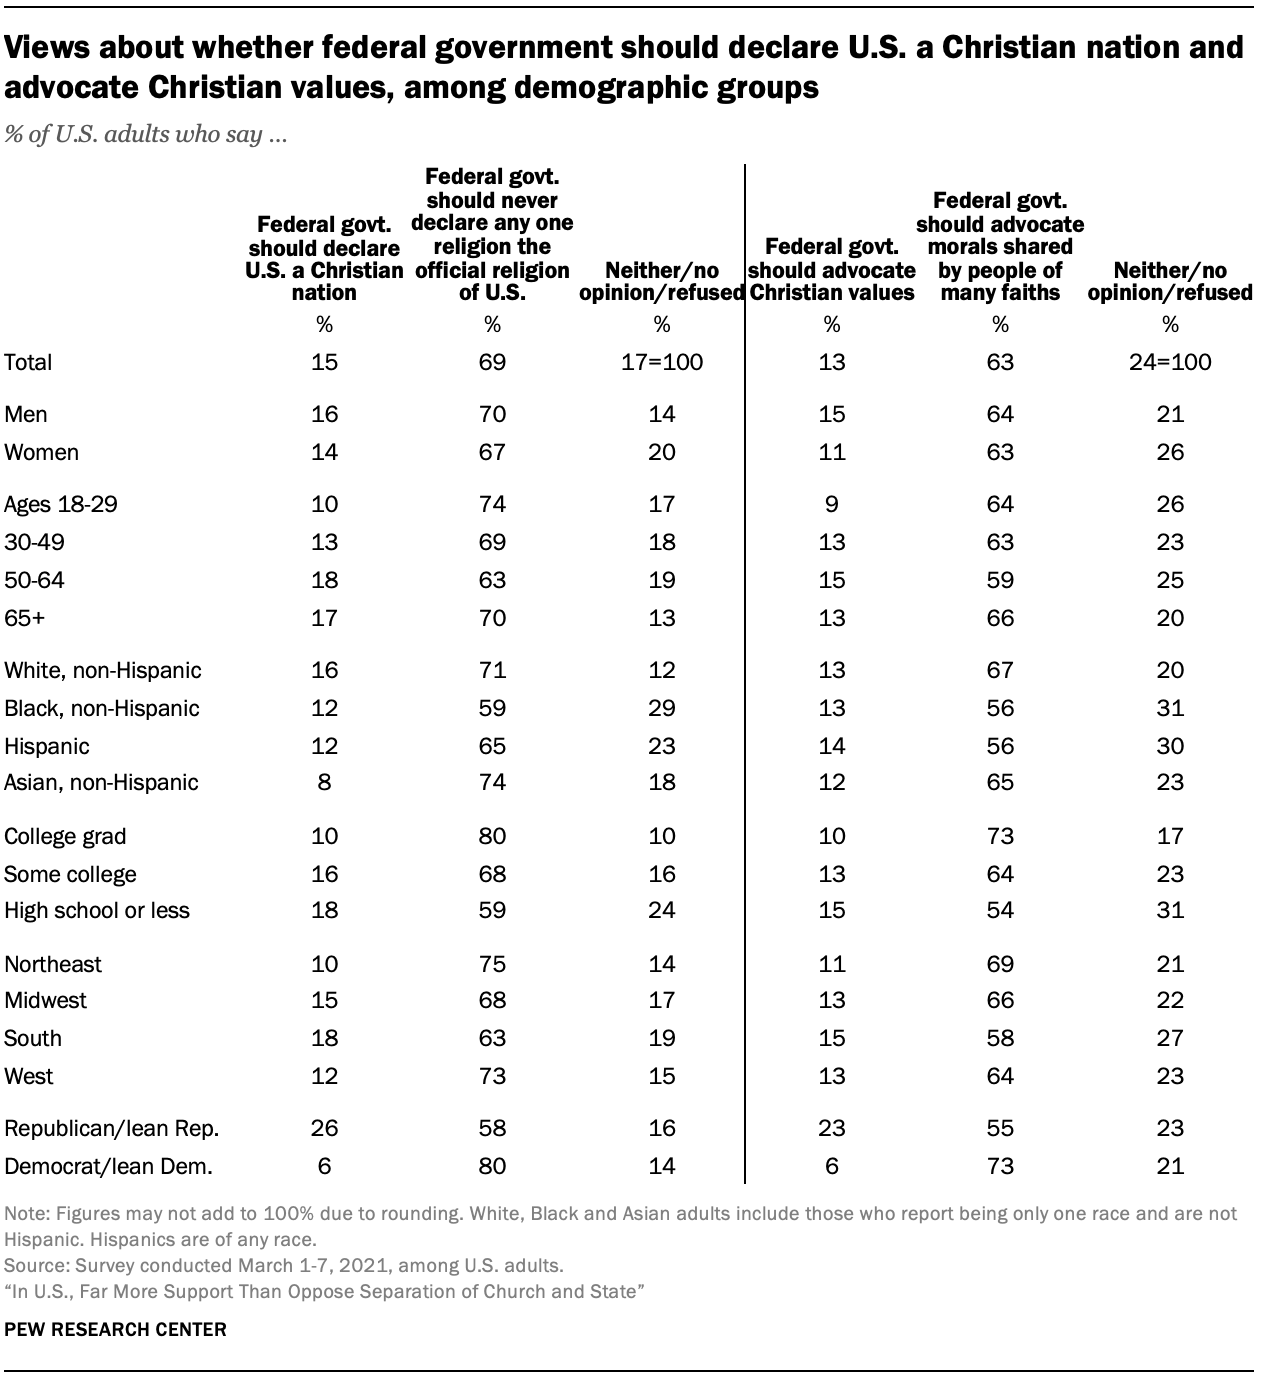 Views about separation of church and state and whether Constitution was divinely inspired, among demographic groups